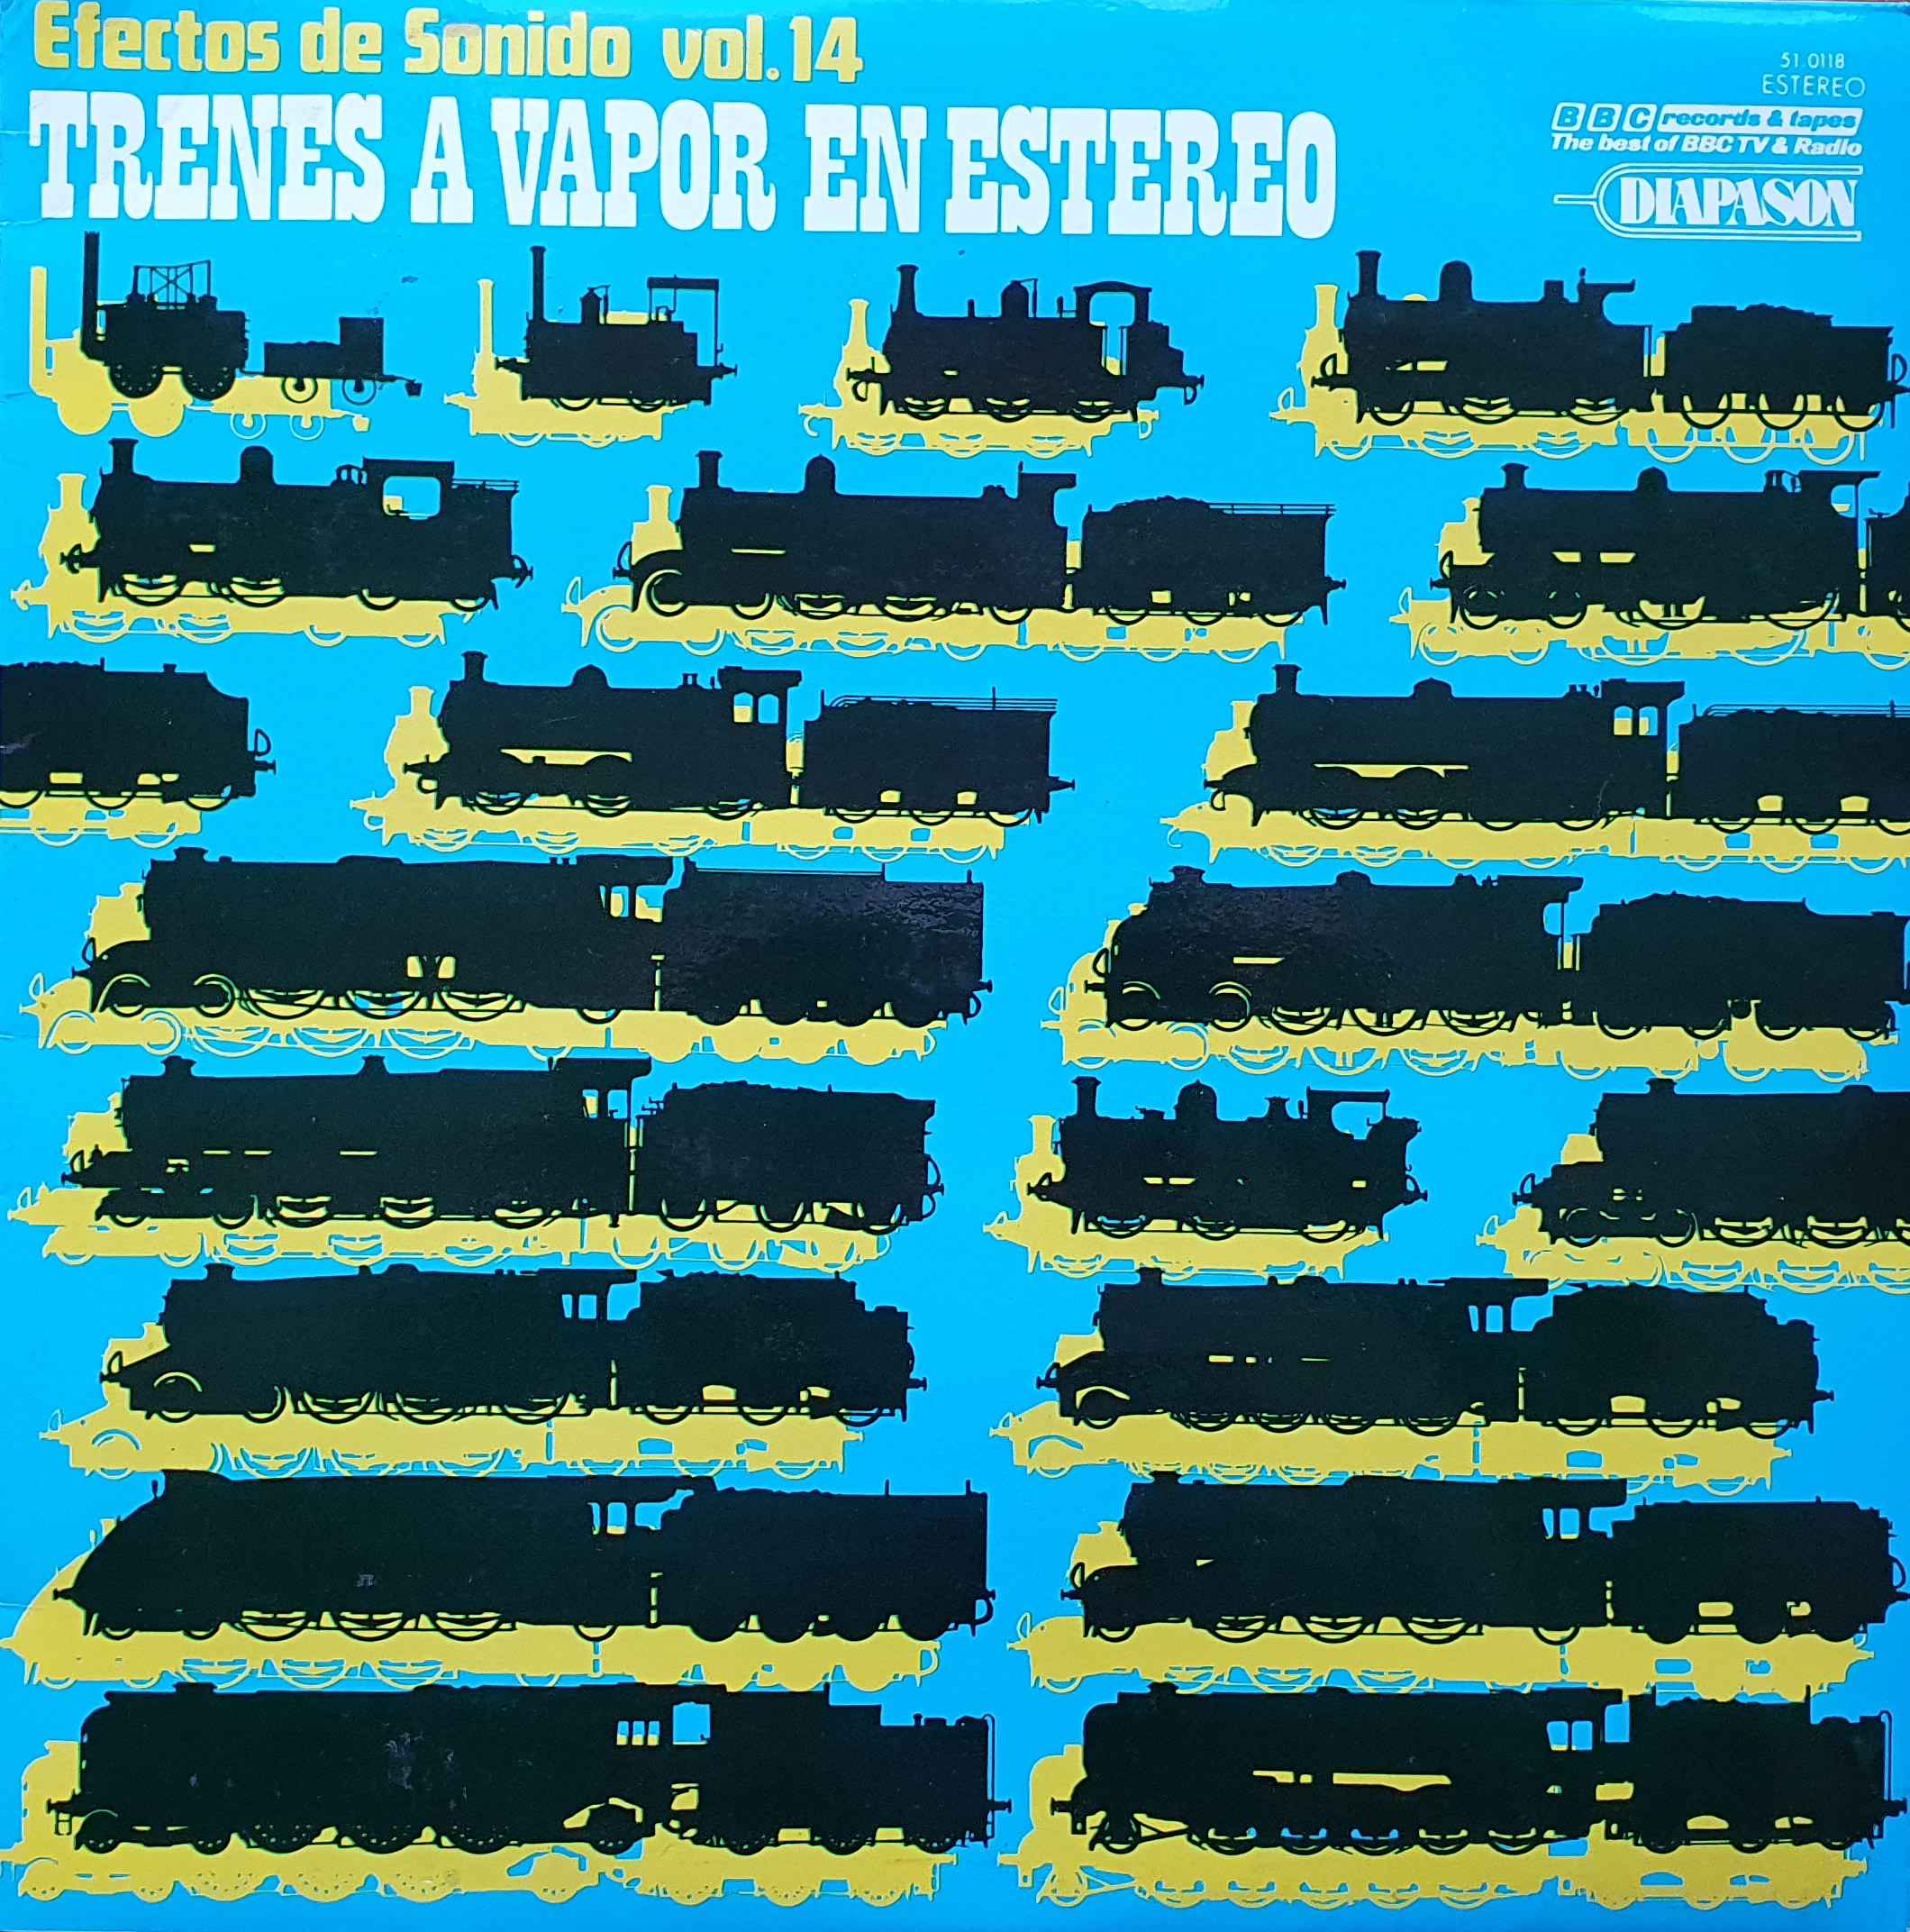 Picture of 51.0118 Trenes A Vapor En Estereo. Efectos de Sonido Vol 14 (Spanish import) by artist Various from the BBC albums - Records and Tapes library